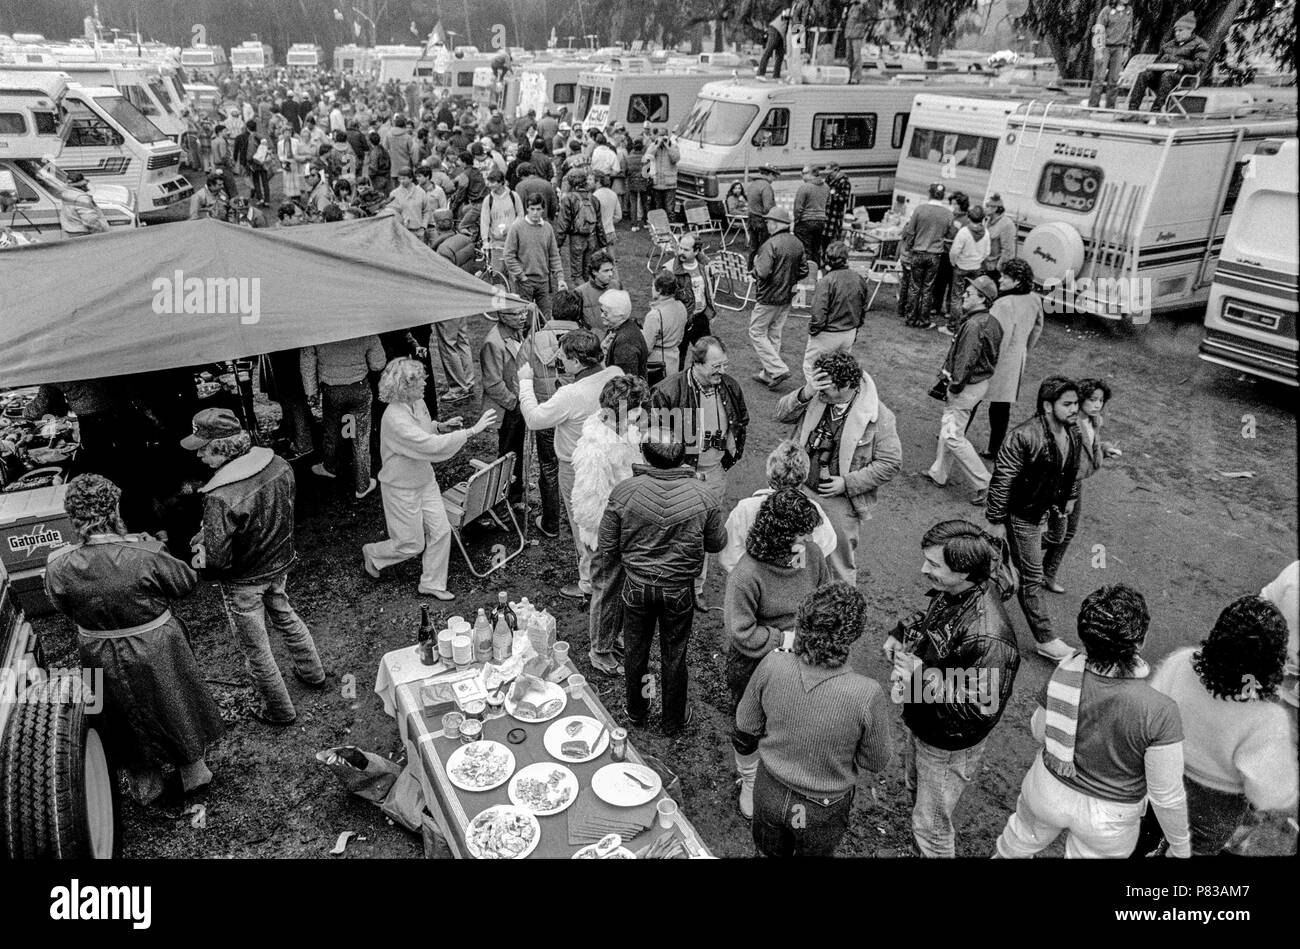 Stanford, California, USA. 20th Jan, 1985. Fans drink and eat at the Super Bowl XIX tailgate on the Stanford University campus. The San Francisco 49ers defeated the Miami Dolphins 38-16 on Sunday, January 20, 1985. Credit: Al Golub/ZUMA Wire/Alamy Live News Stock Photo